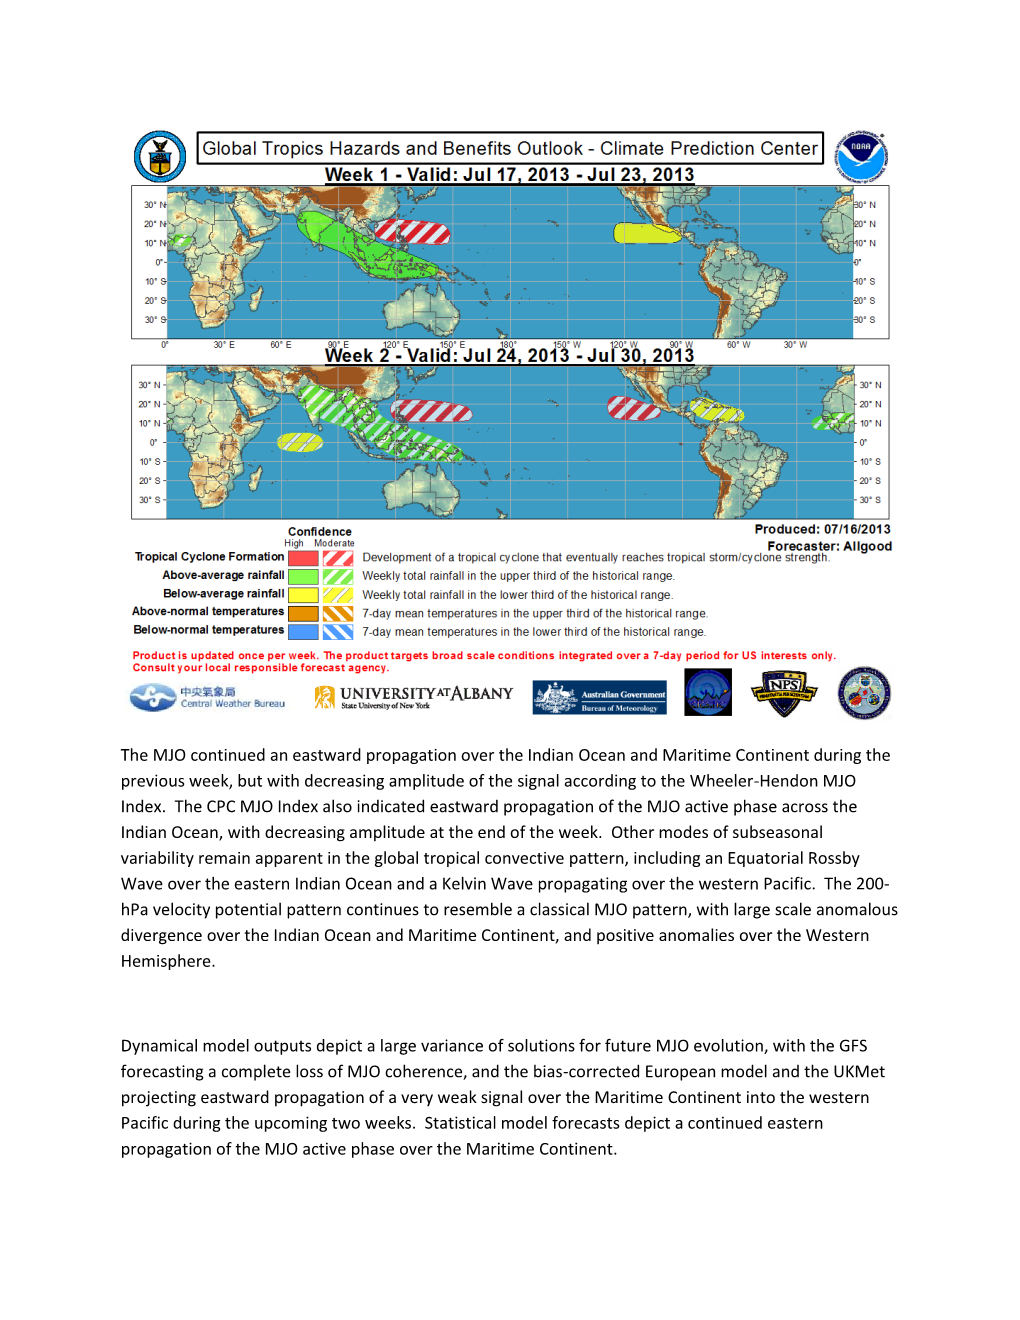 The MJO Continued an Eastward Propagation Over the Indian Ocean and Maritime Continent During the Previous Week, but with Decrea